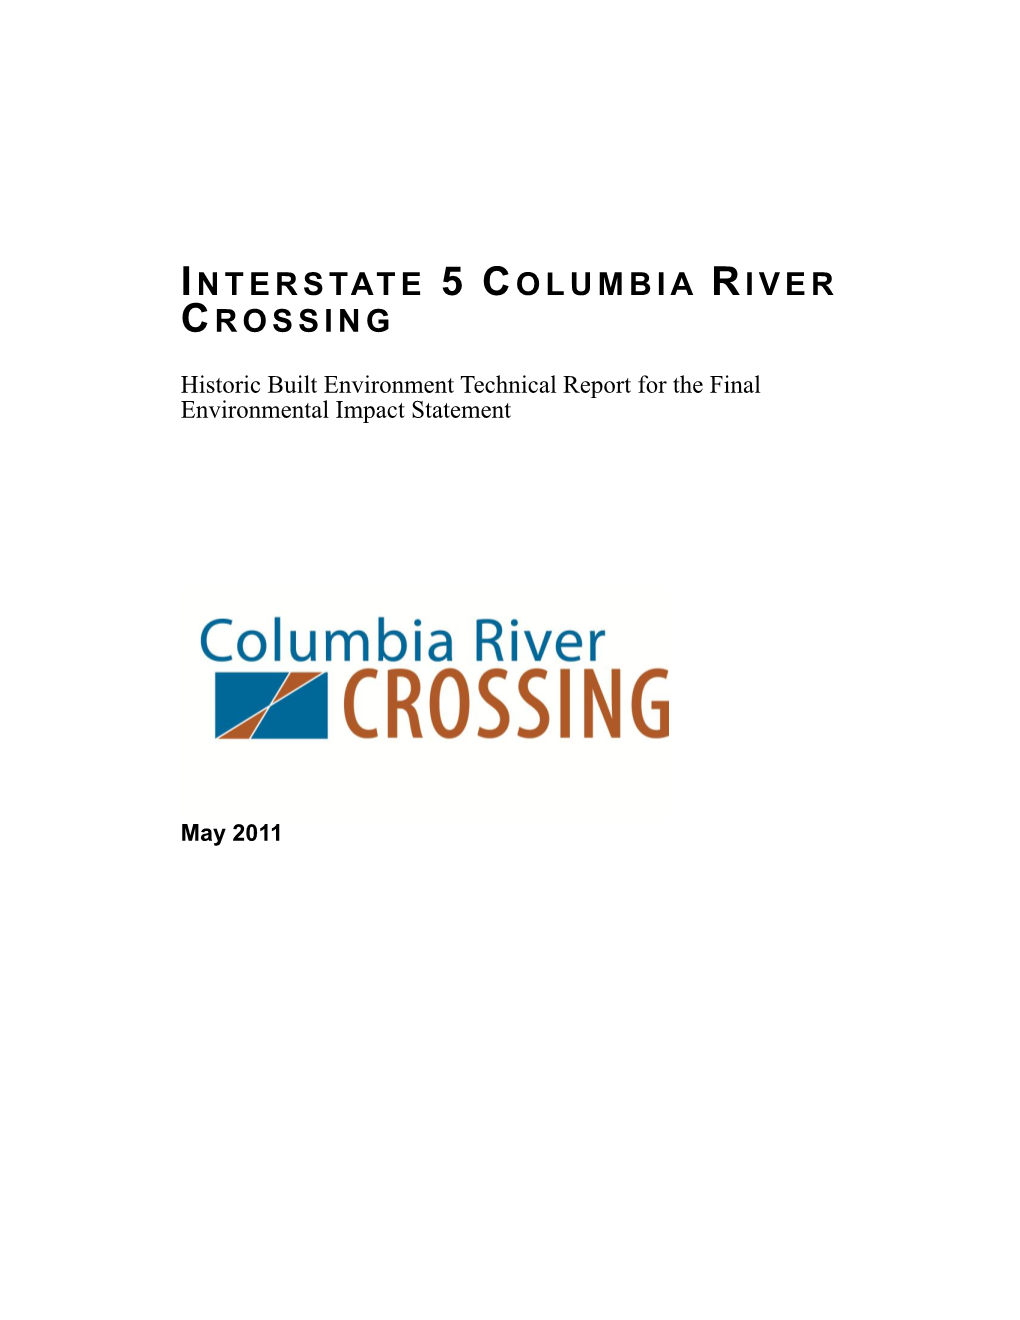 Interstate 5 Columbia River Crossing Historic Built Environment Technical Report for the Final Environmental Impact Statement